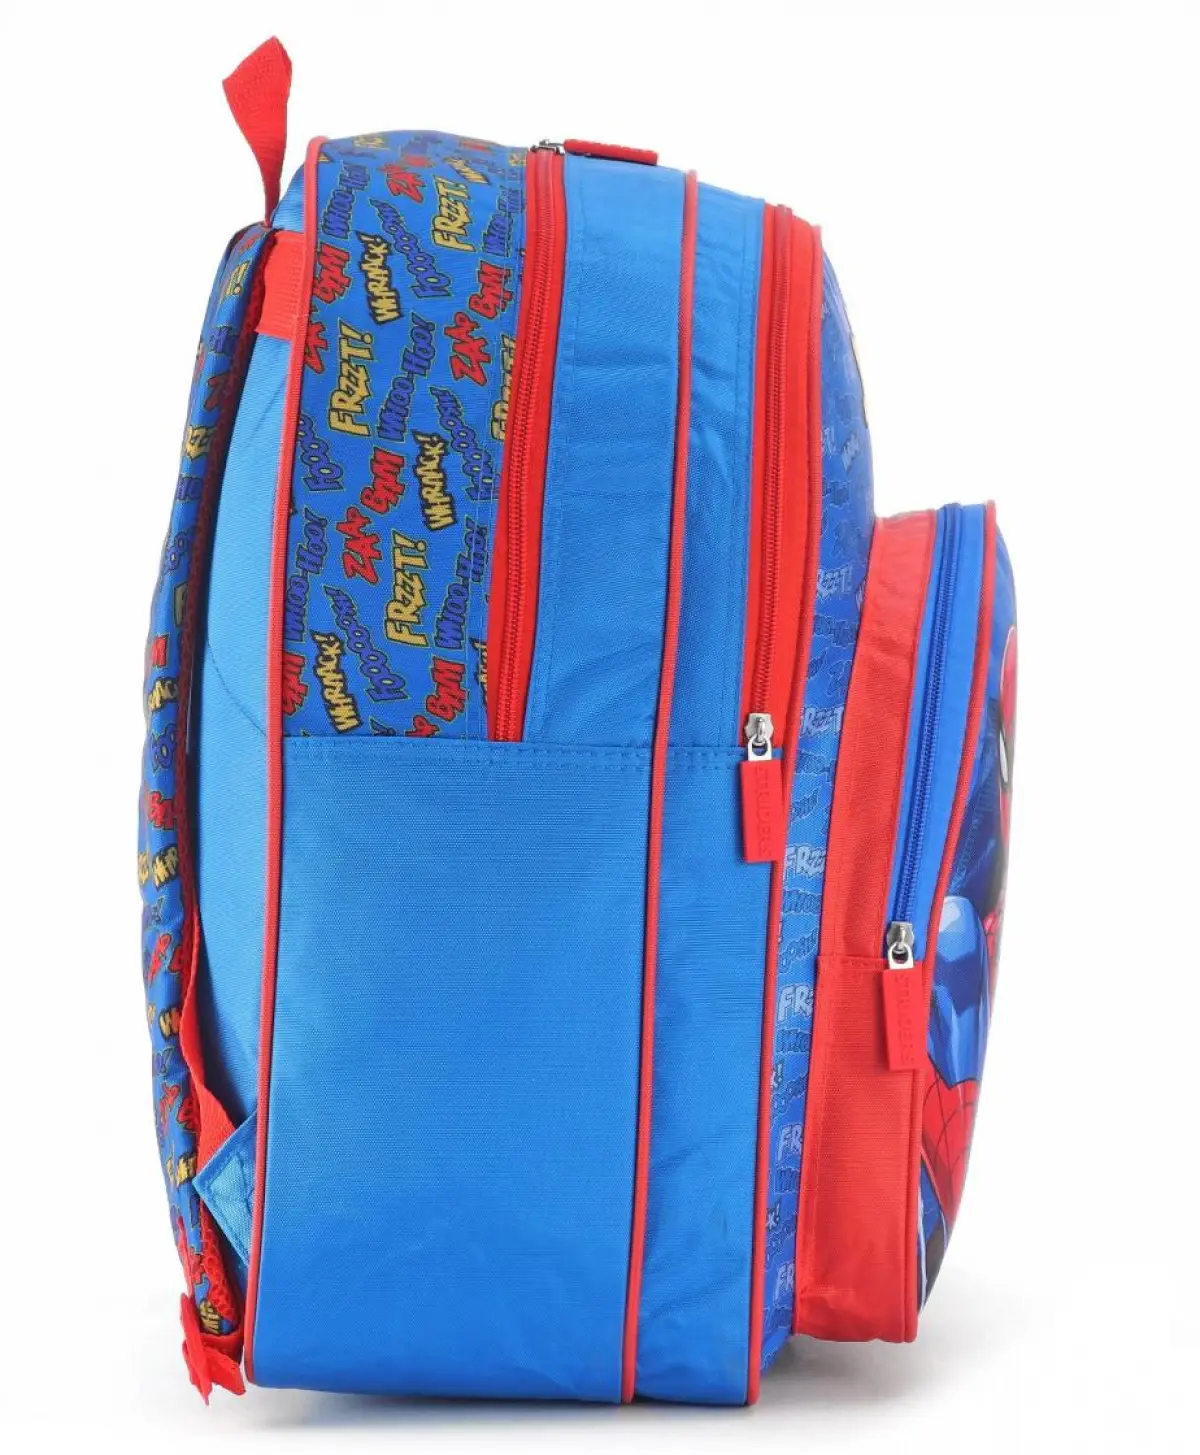 Striders 18 inches Spiderman School Bag Inspire Learning with Spider-Man's Style Multicolor For Kids Ages 8Y+